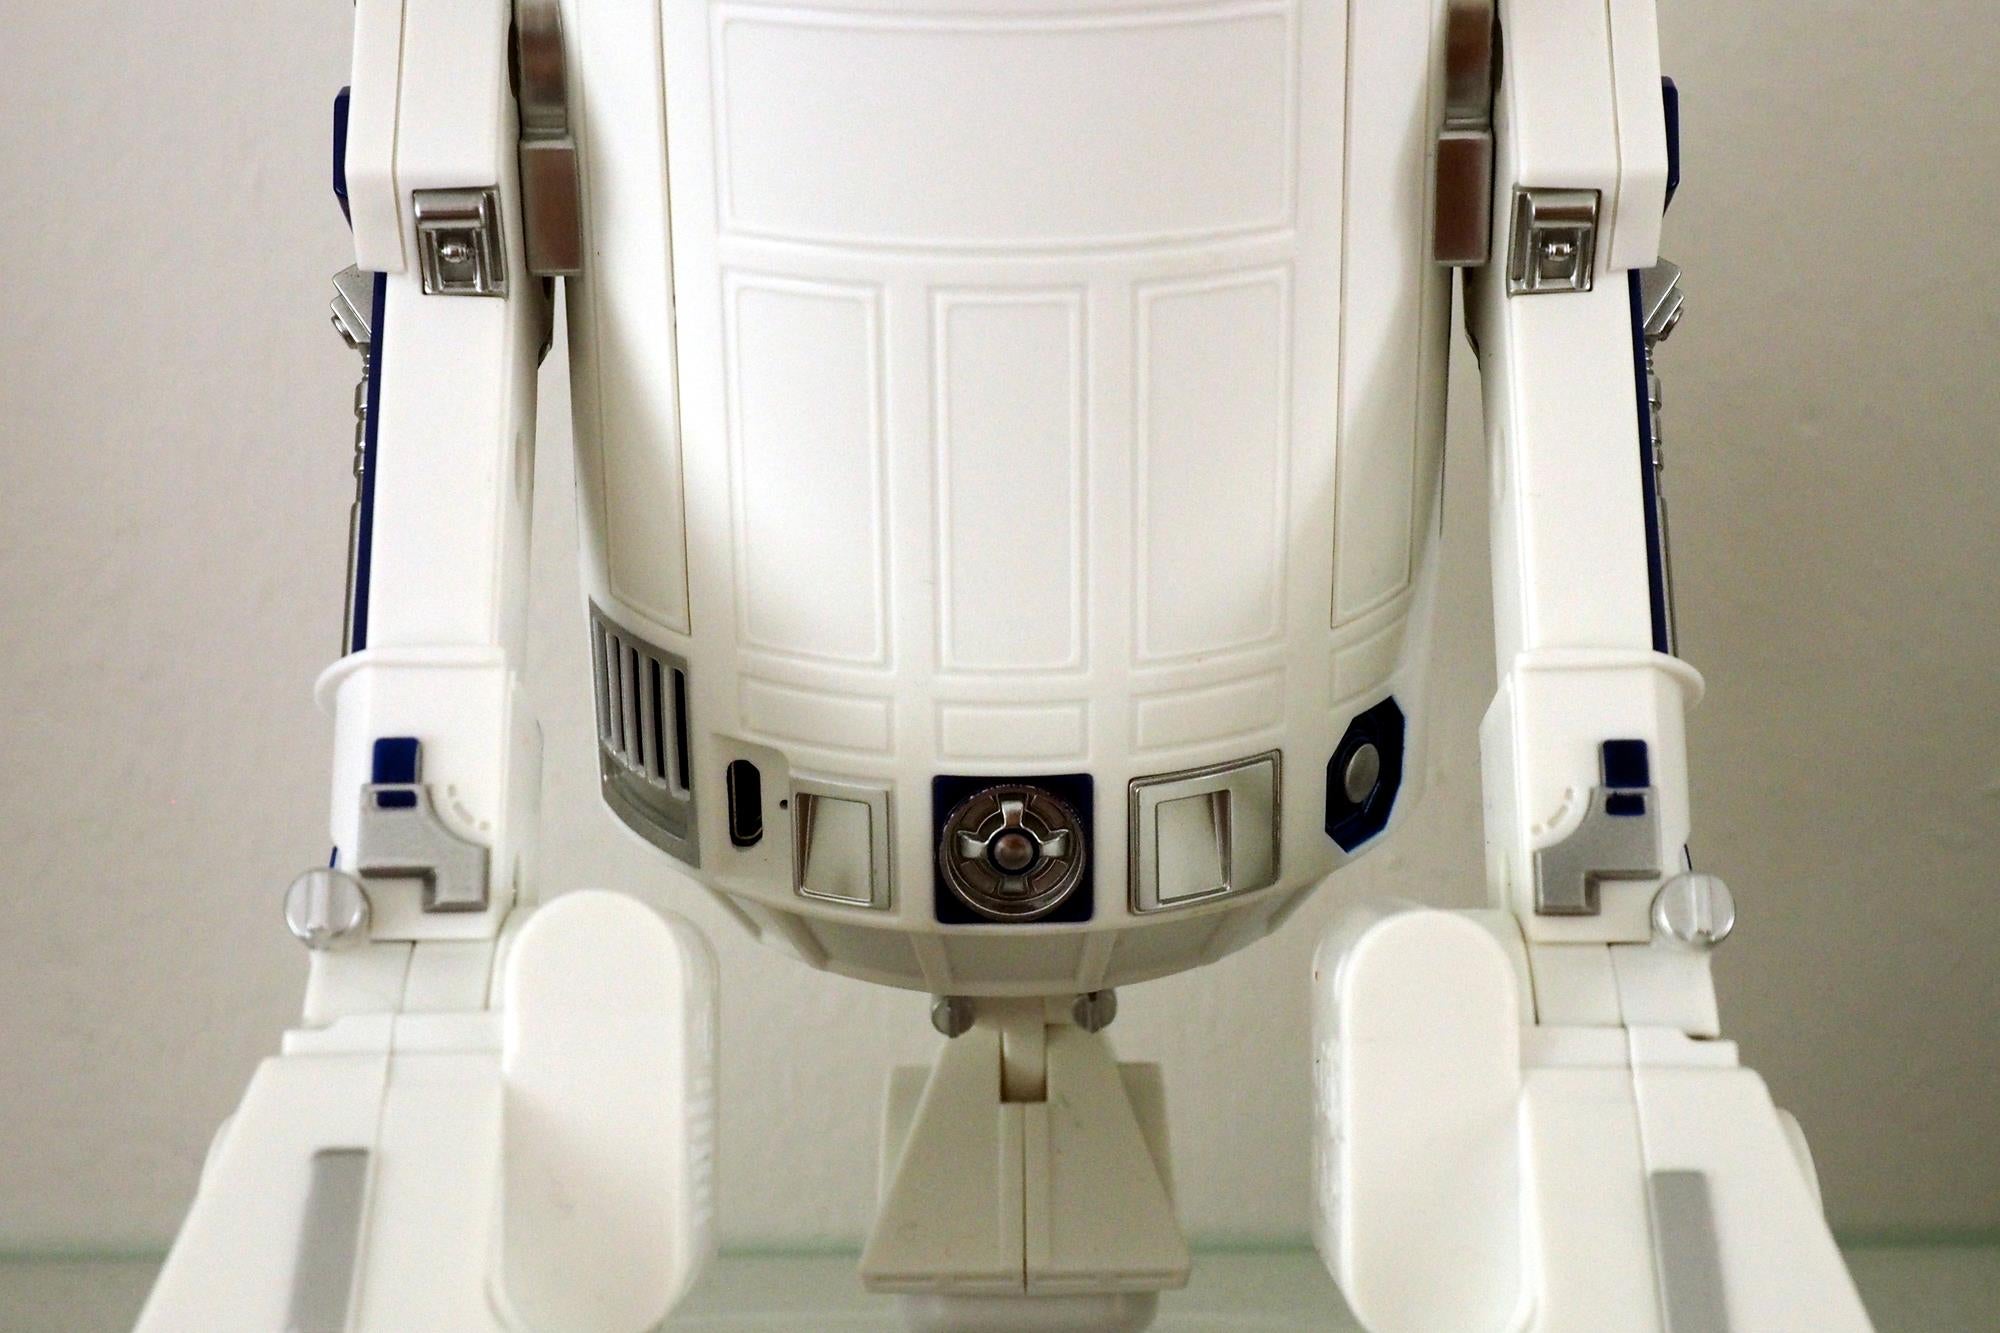 Close-up of Sphero R2-D2 droid toy from Star Wars.